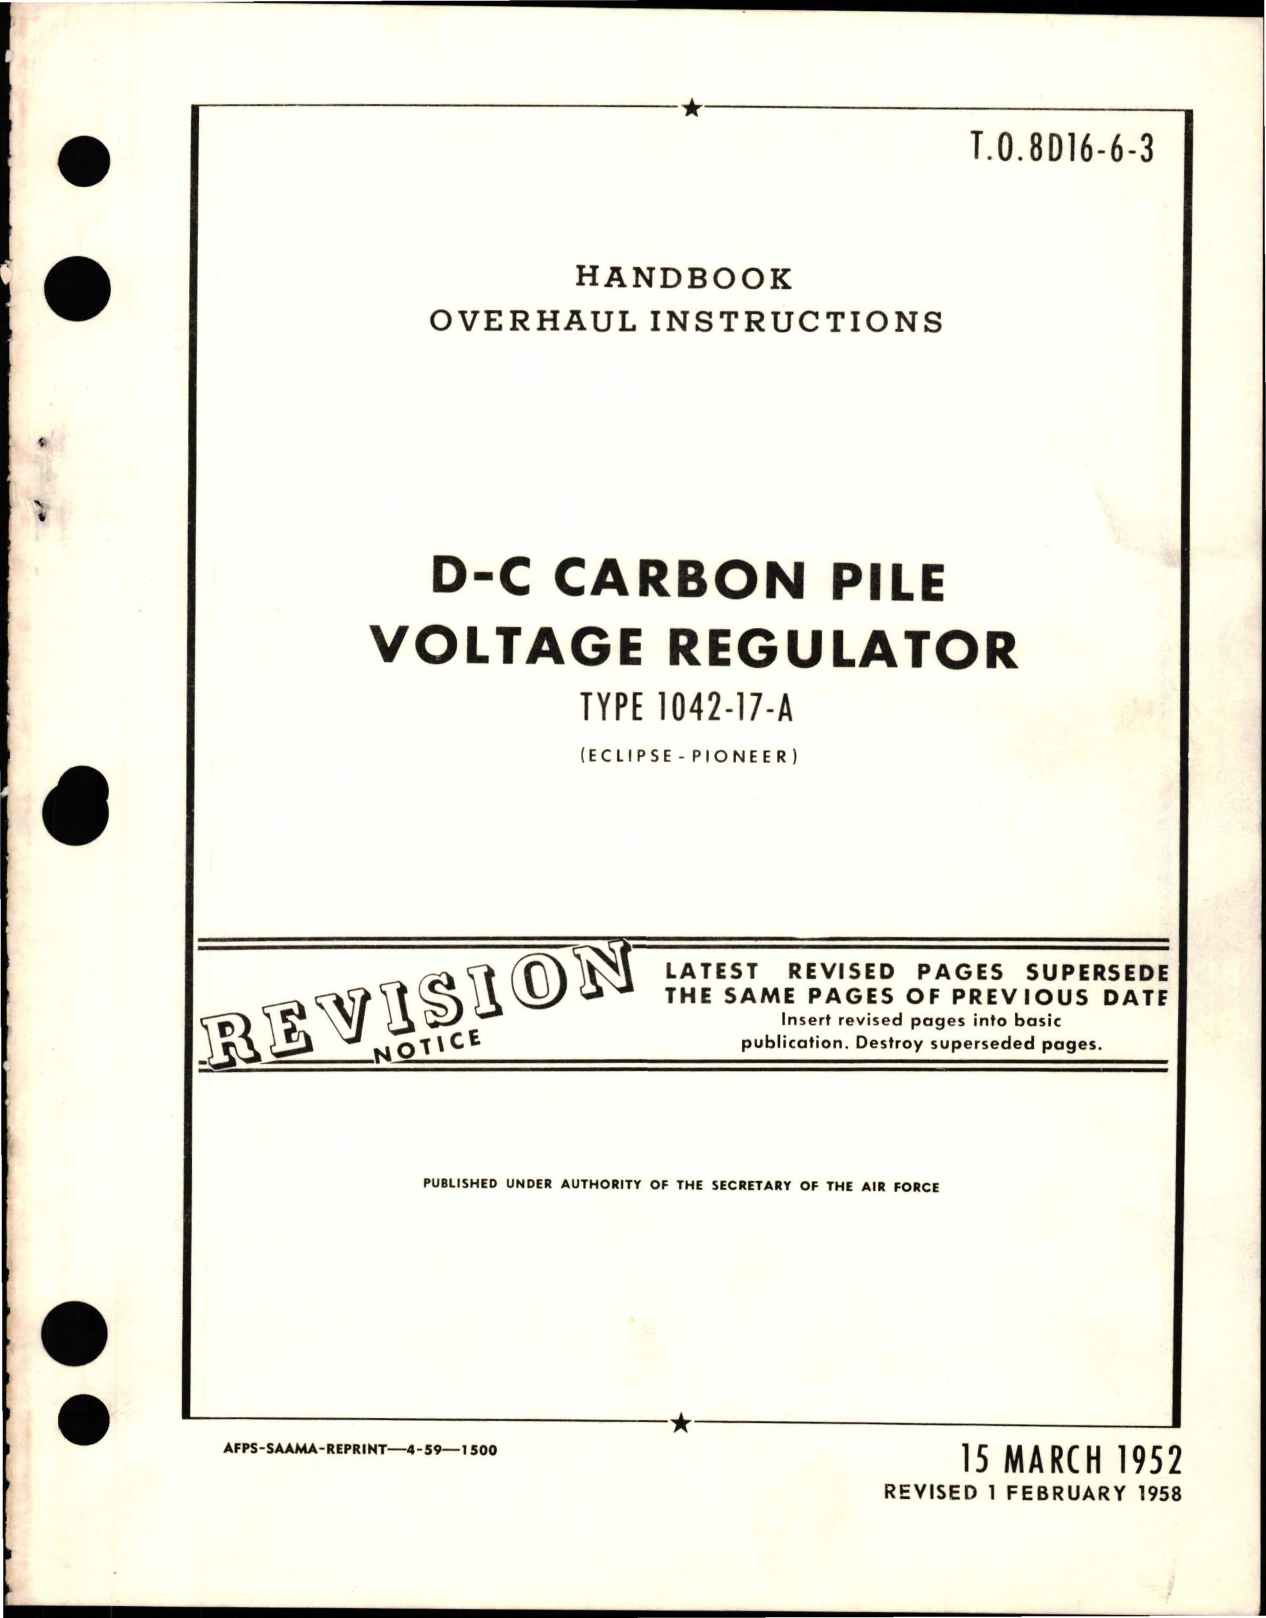 Sample page 1 from AirCorps Library document: Overhaul Instructions for D-C Carbon Pile Voltage Regulator - Type 1042-17-A